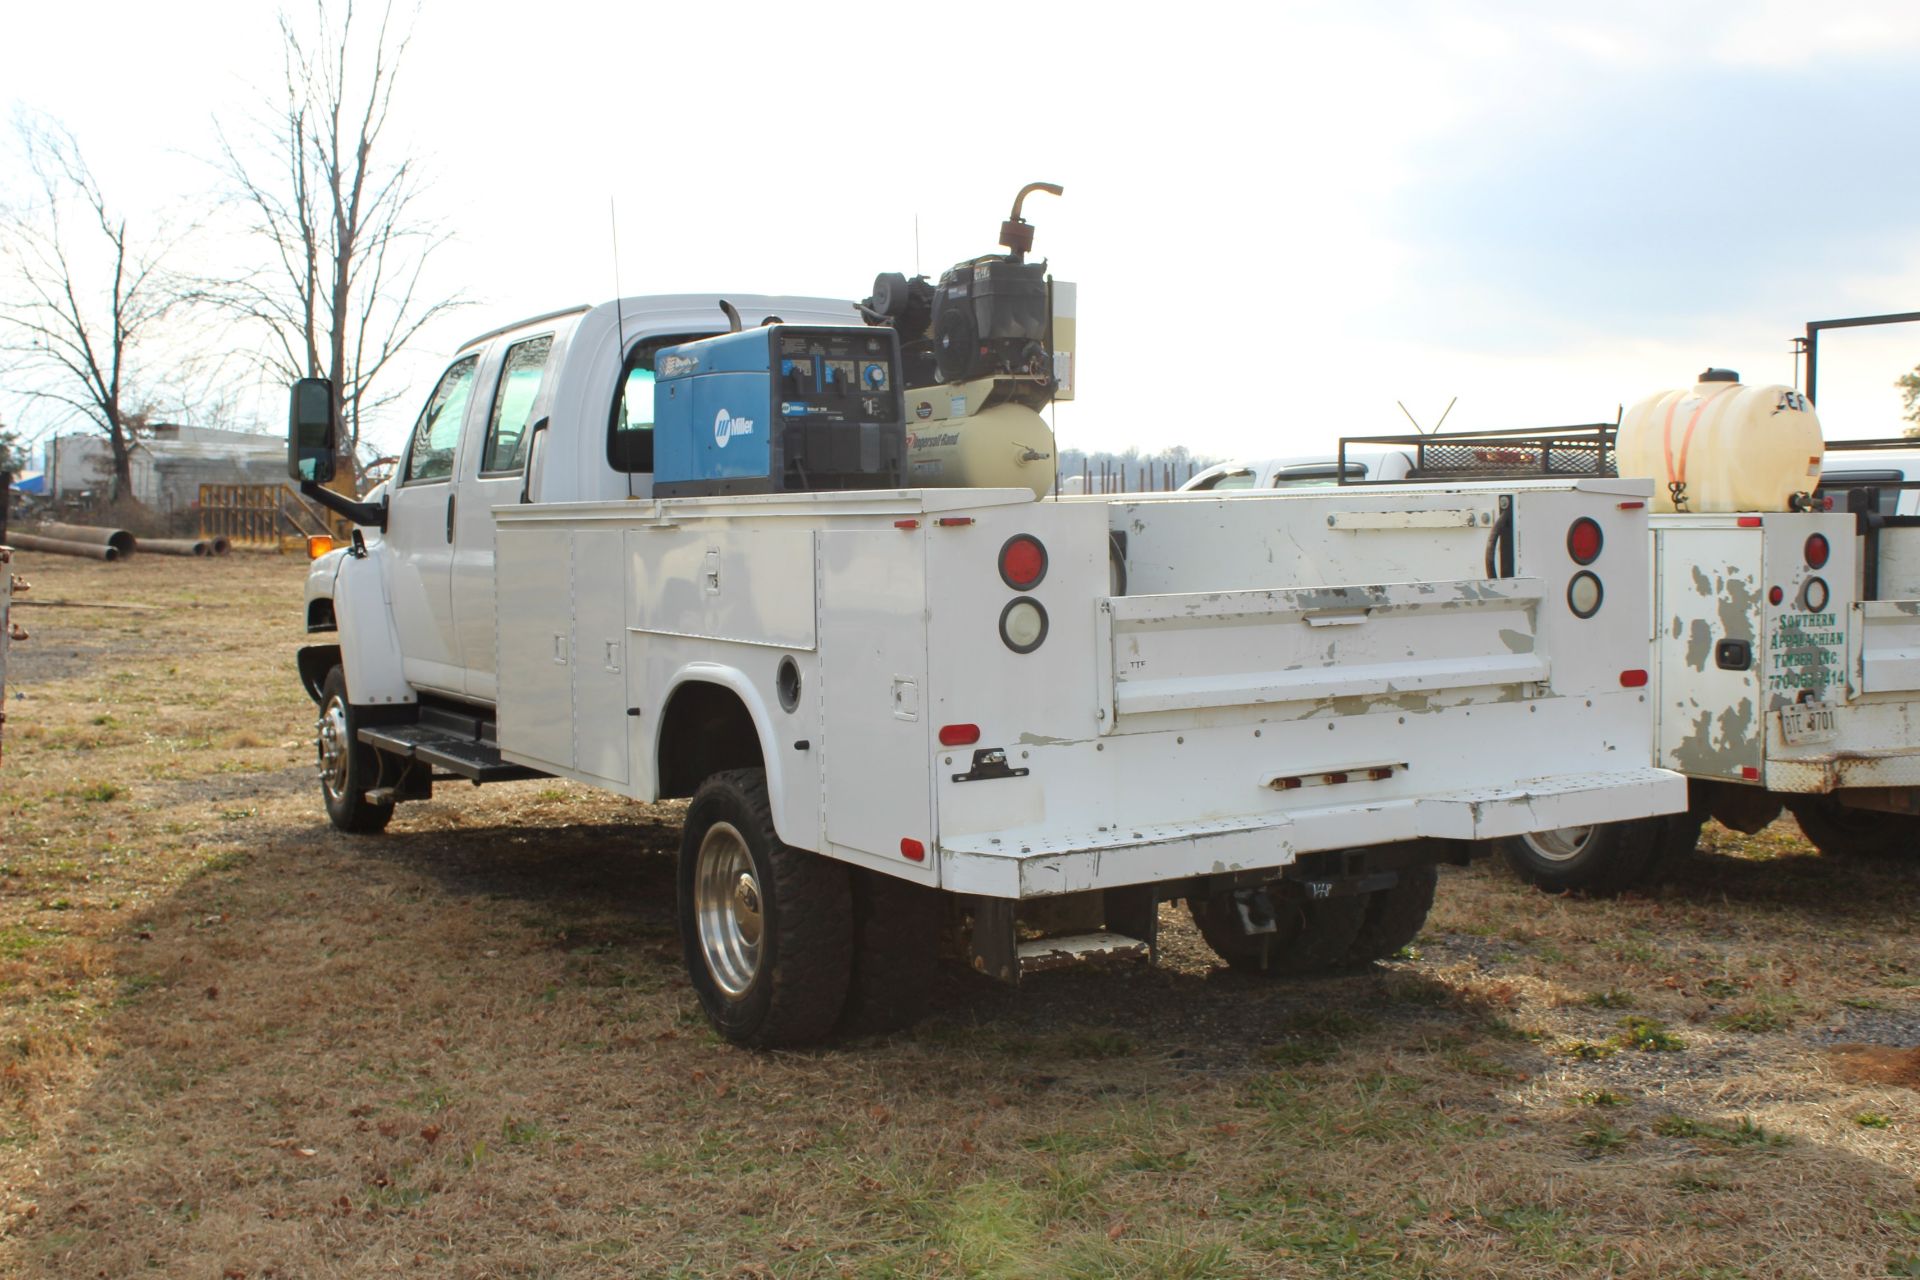 2006 GMC 4500 SERVICE TRUCK - Image 2 of 4